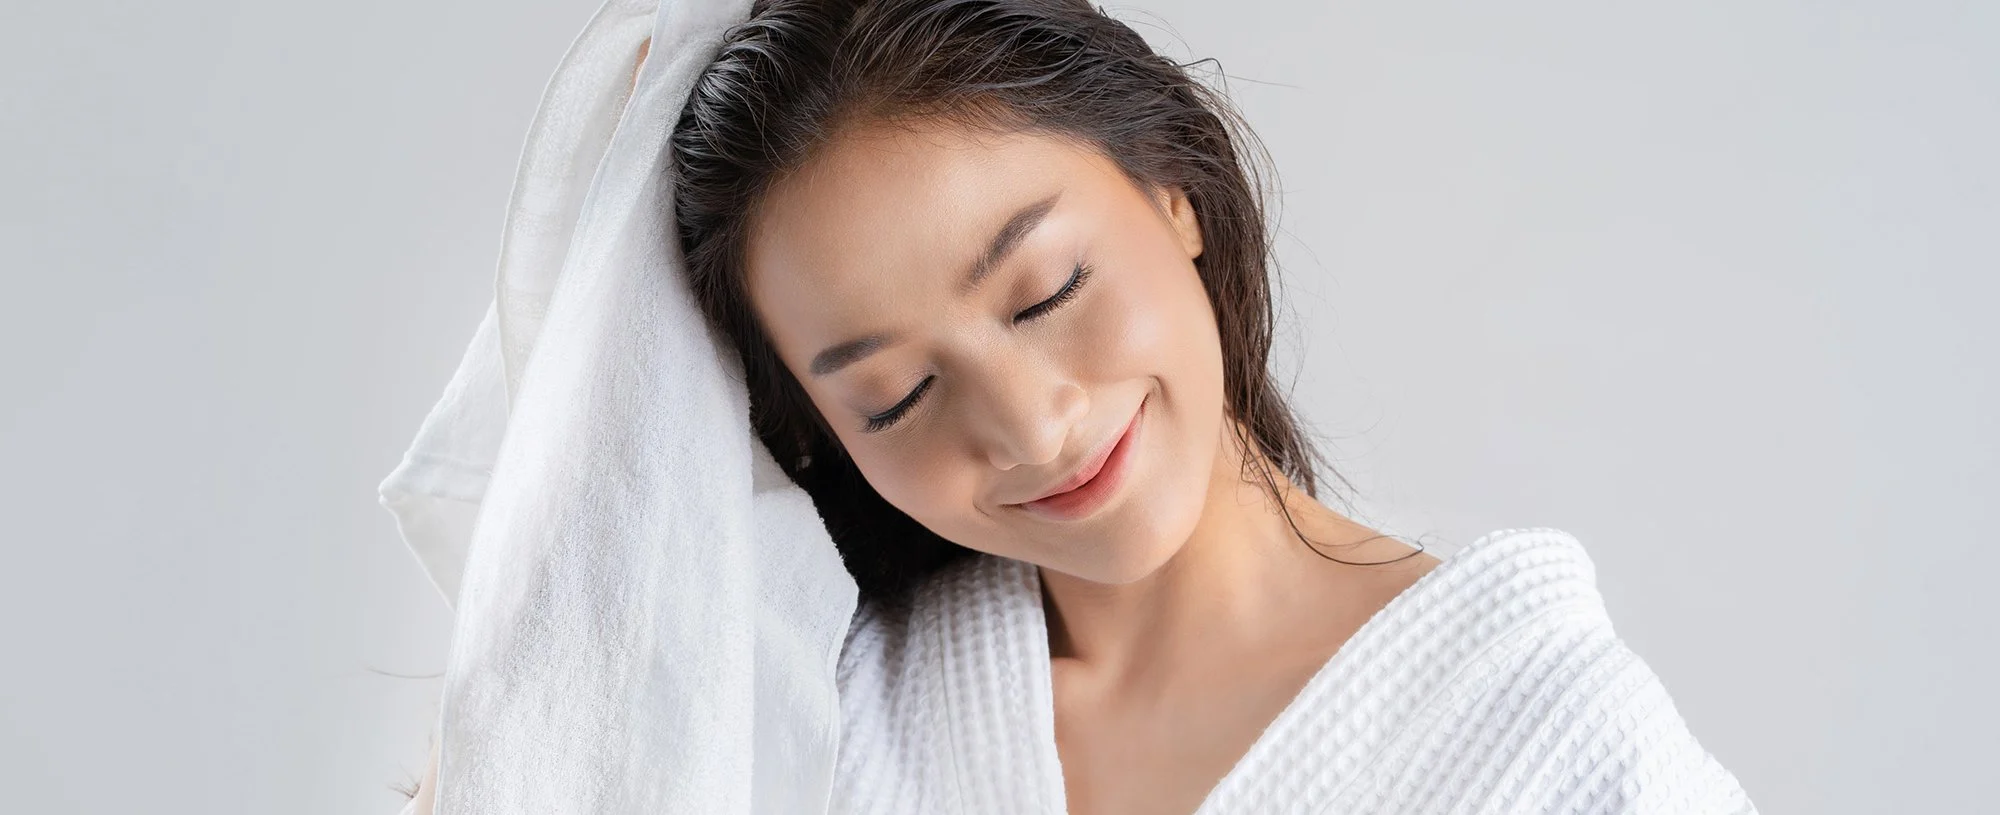 smiling woman with wet hair wrapped in a white towel